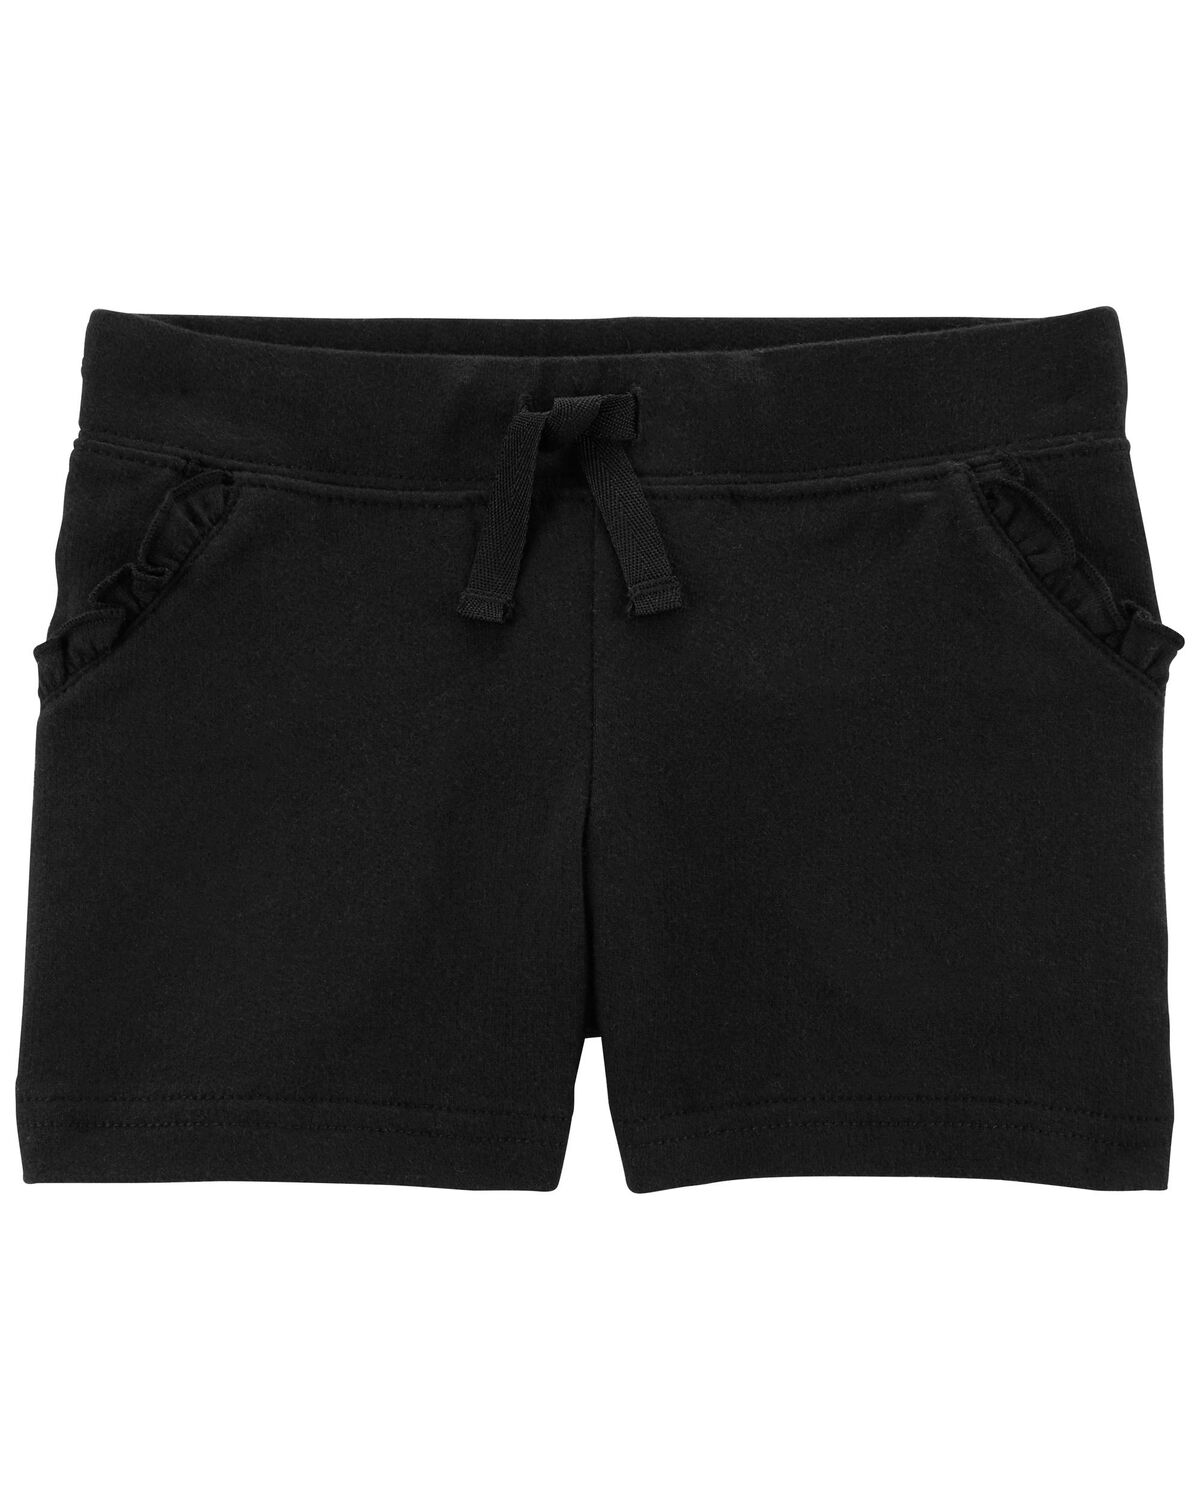 Black Baby Pull-On French Terry Shorts | carters.com